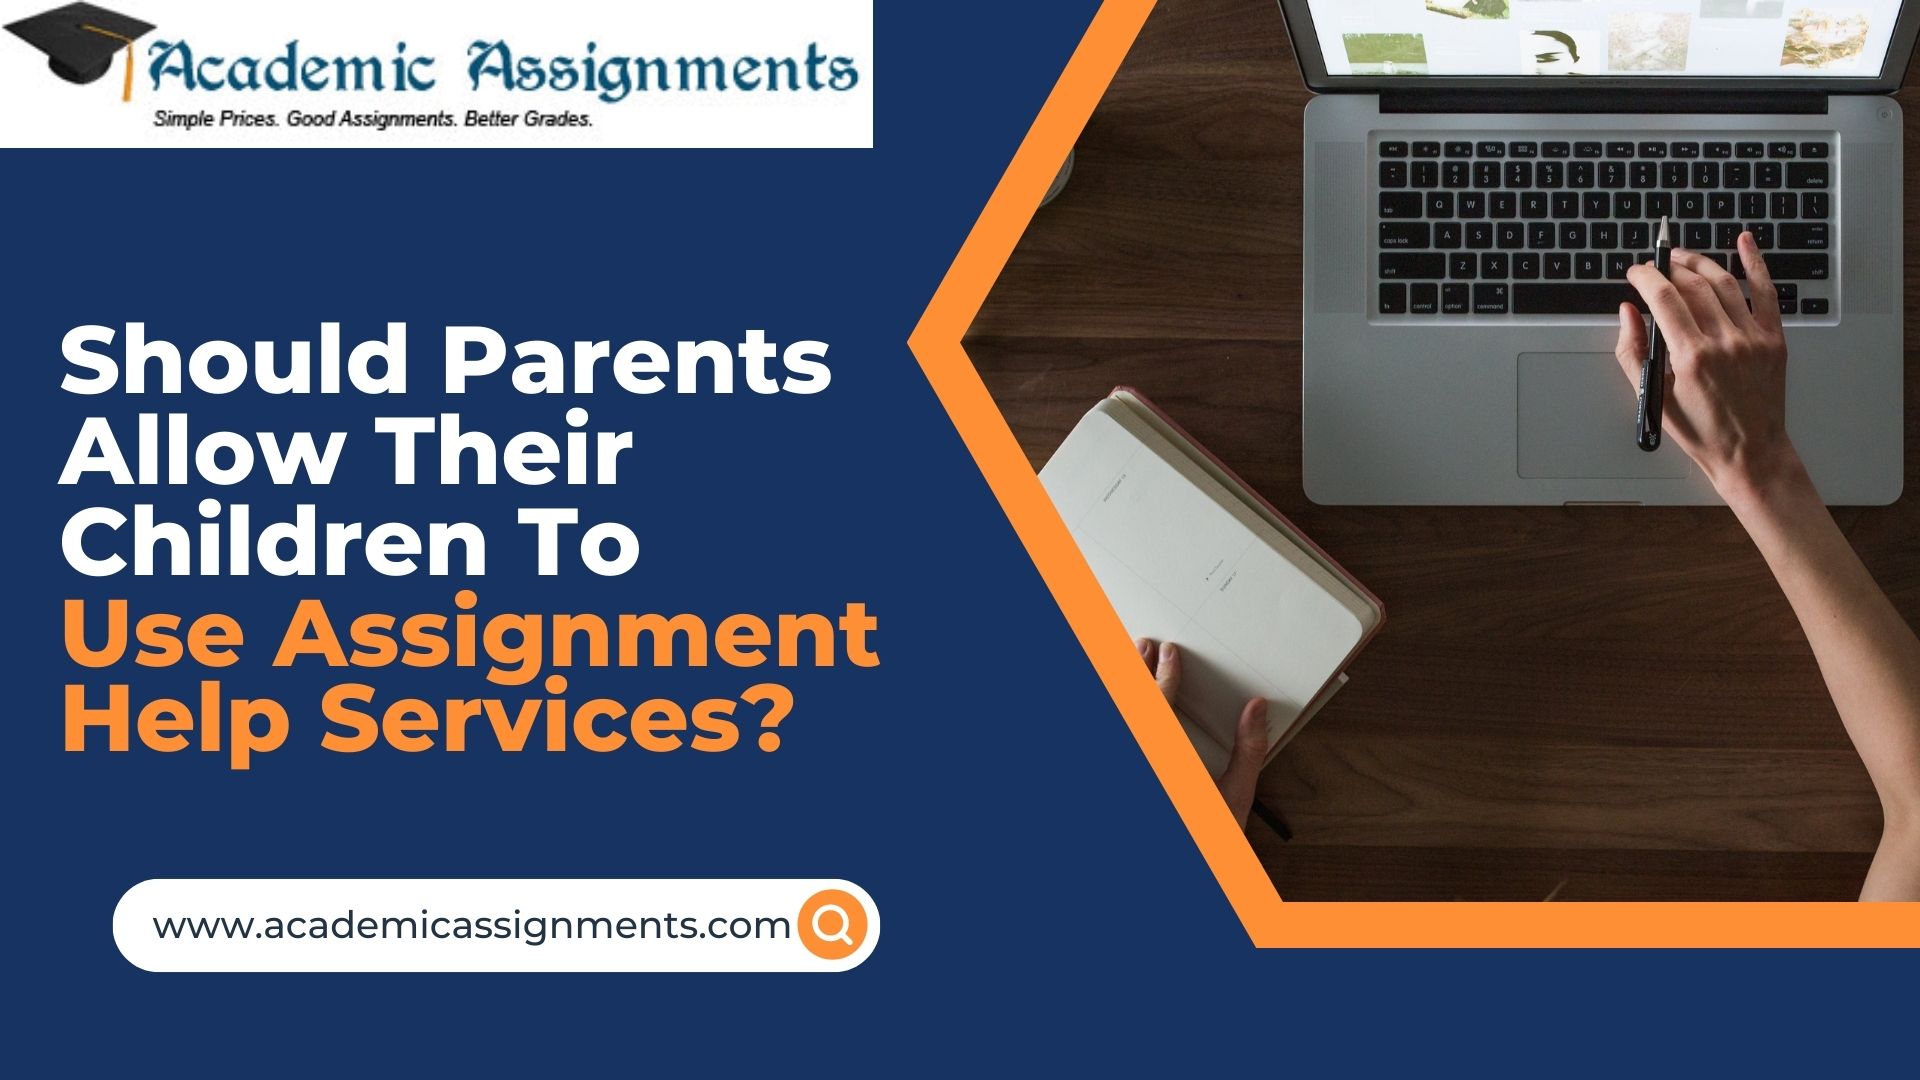 Should Parents Allow Their Children To Use Assignment Help Services